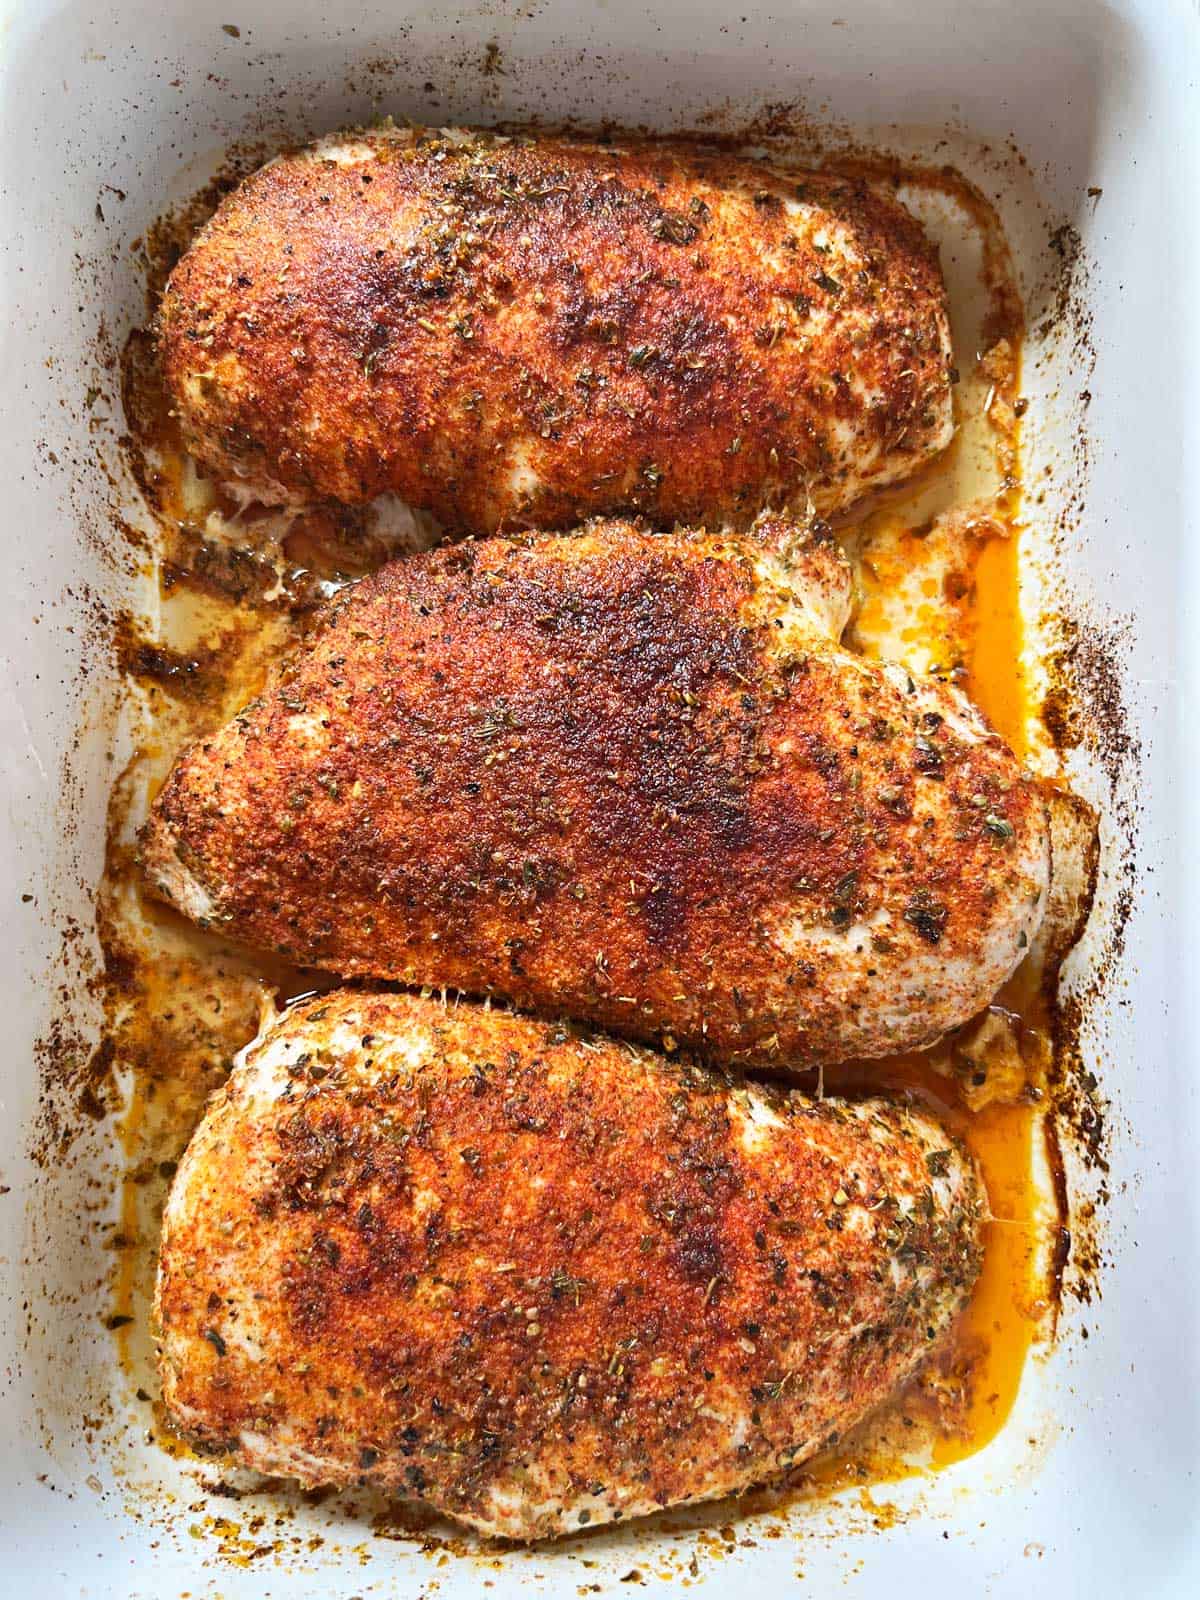 Three baked chicken breasts in a white baking dish.